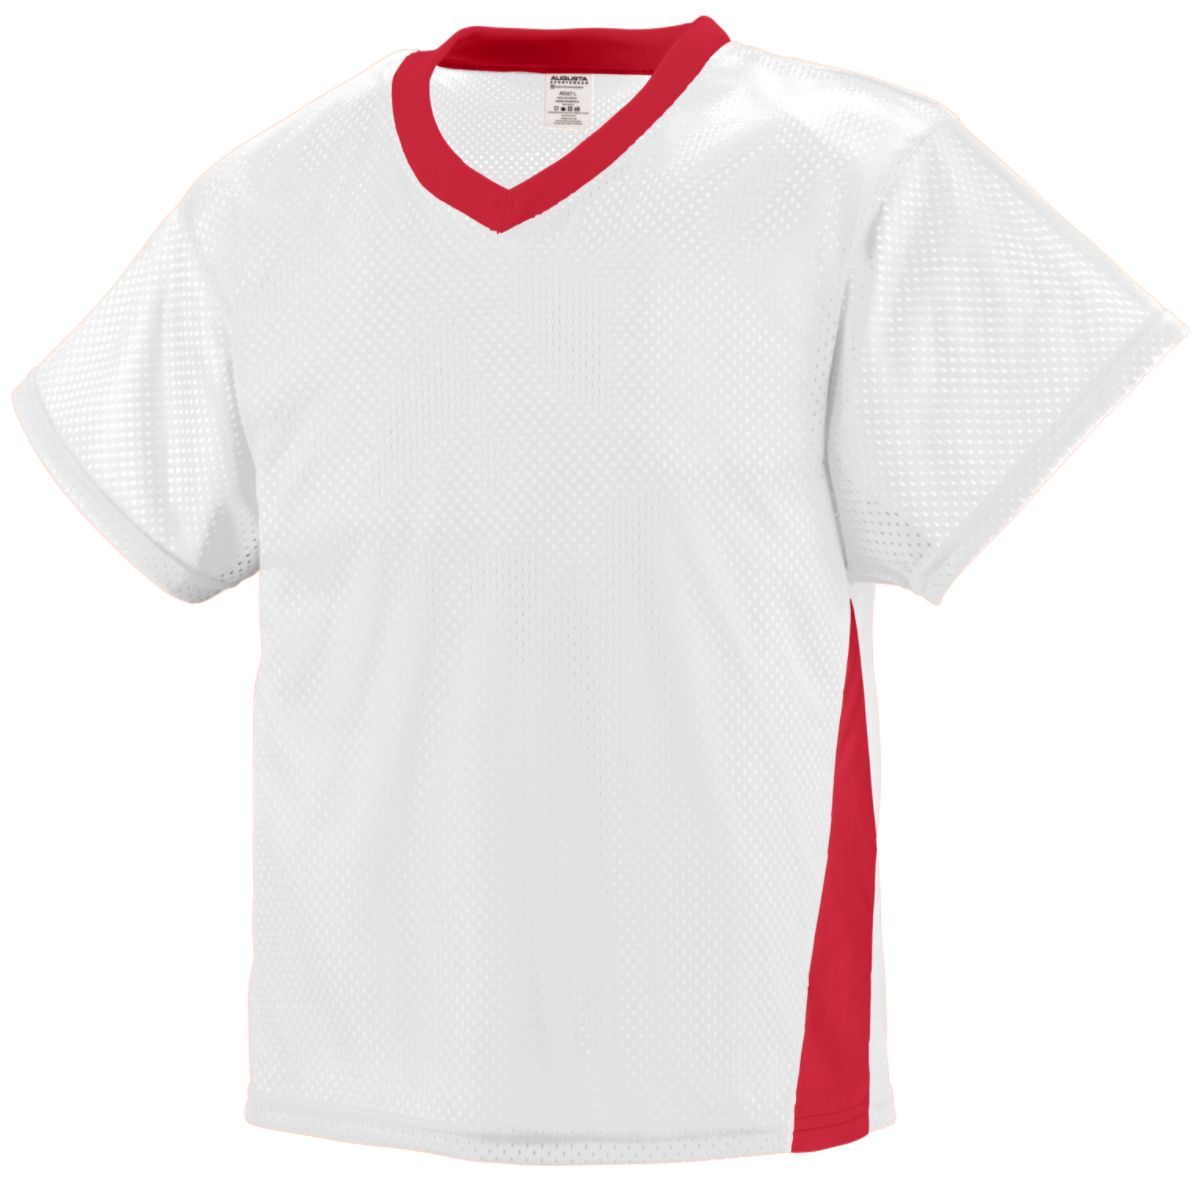 Augusta Sportswear High Score Jersey in White/Red  -Part of the Adult, Adult-Jersey, Augusta-Products, Lacrosse, Shirts, All-Sports, All-Sports-1 product lines at KanaleyCreations.com